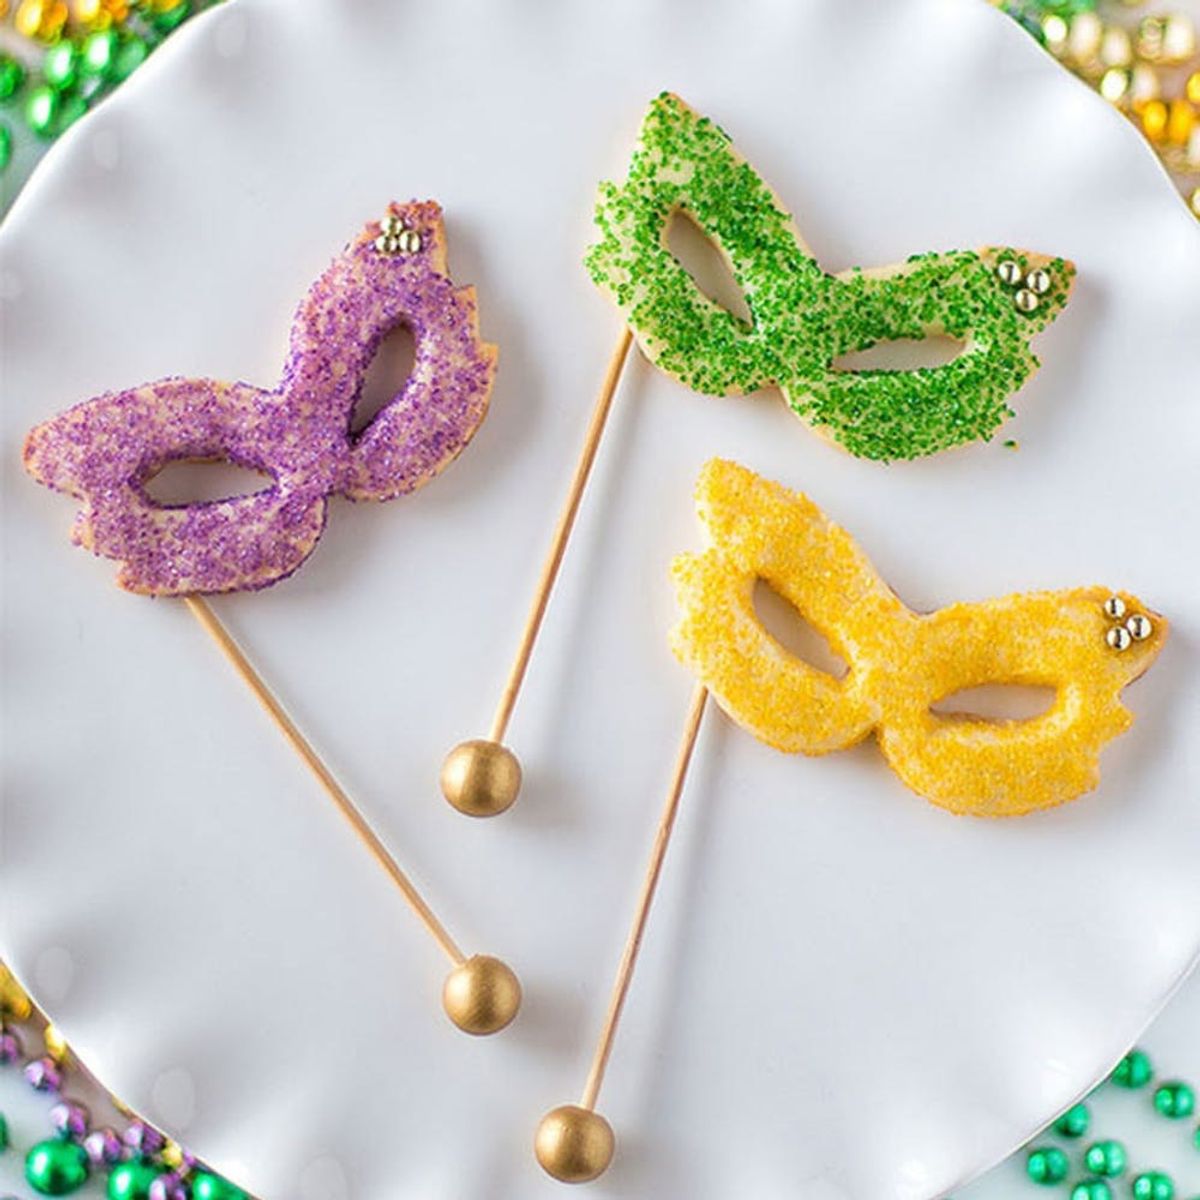 20 Mardi Gras Party Ideas to Let the Good Times Roll